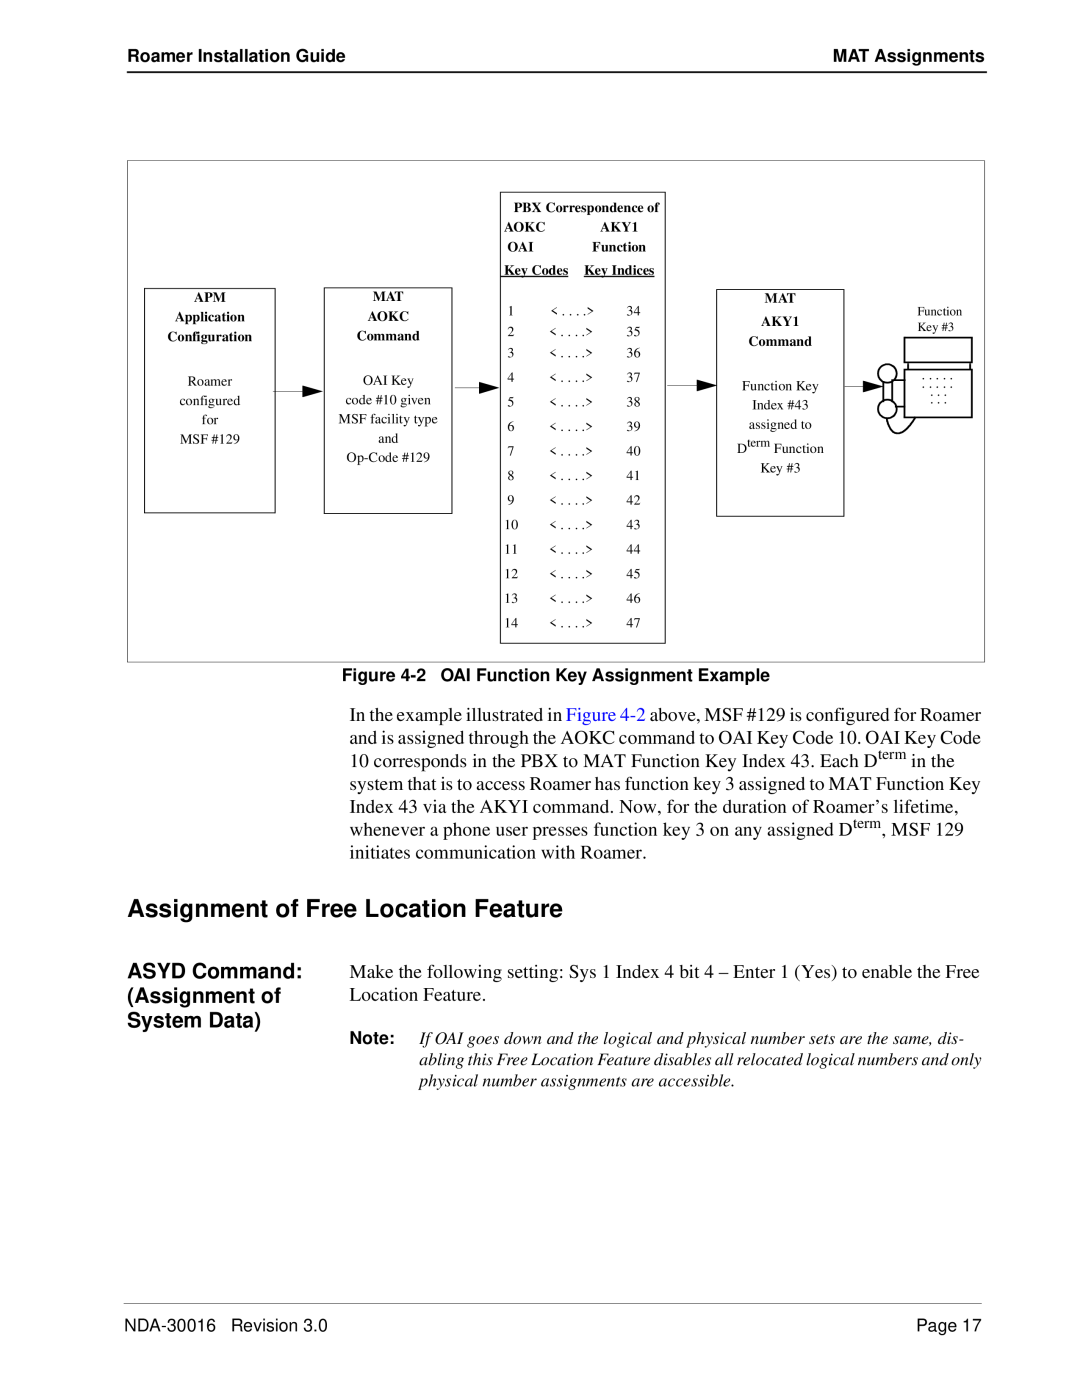 NEC NDA-30016-003 manual Assignment of Free Location Feature, ASYD Command Assignment of System Data 